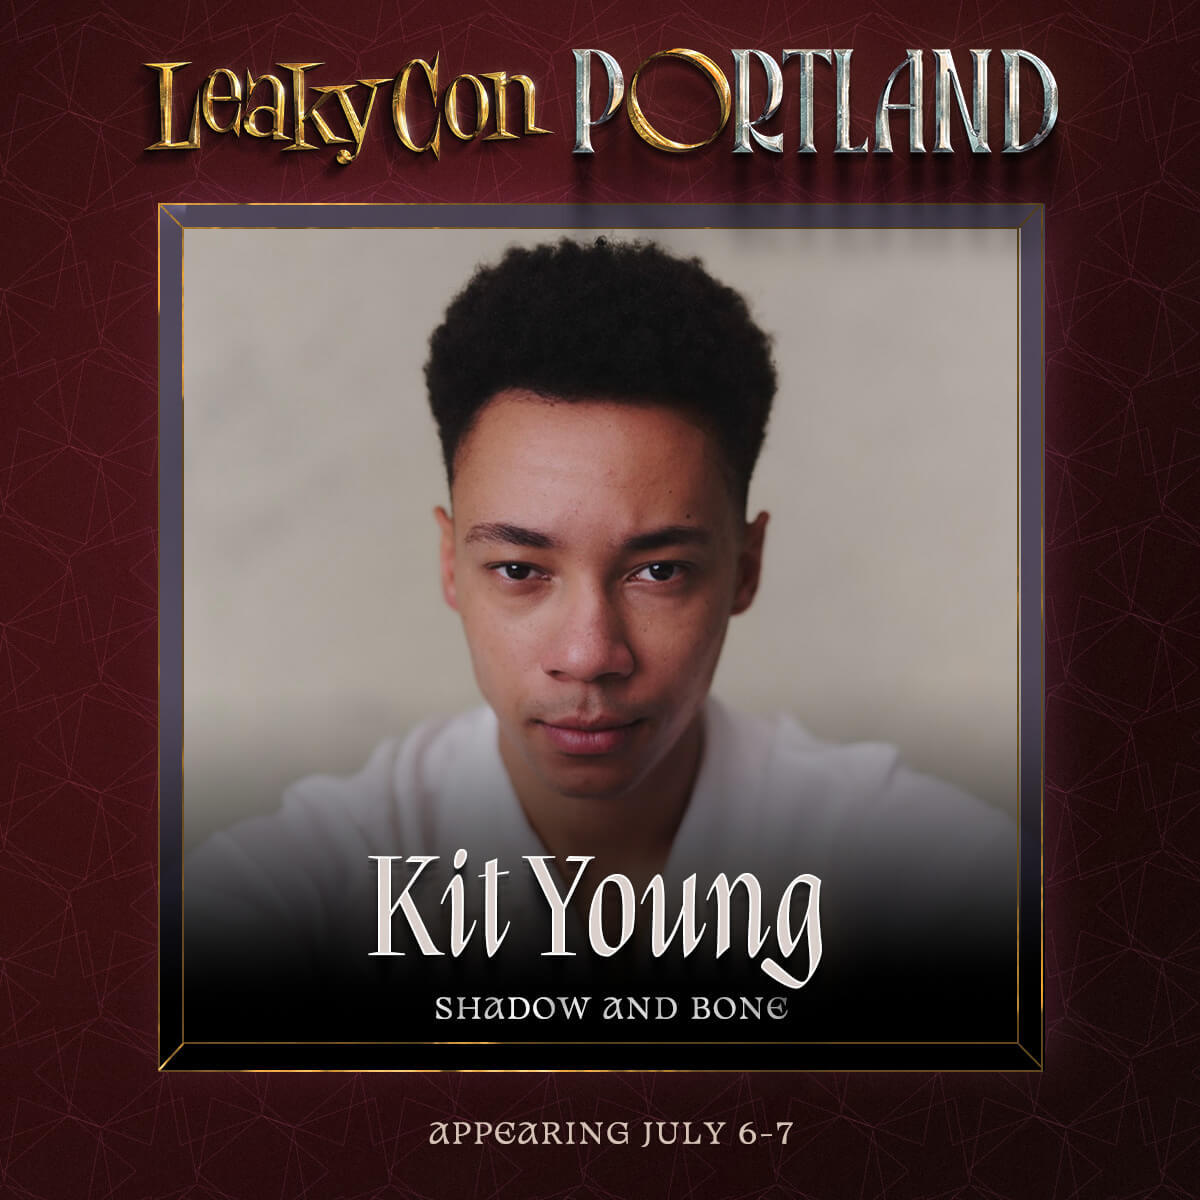 Join us in welcoming Kit Young from Shadow and Bone to LeakyCon Portland! 🎉✨ Get ready for an enchanting adventure filled with magic and mystery. See you there! Get your tickets at leakycon.com #LeakyCon #ShadowAndBone #Grishaverse